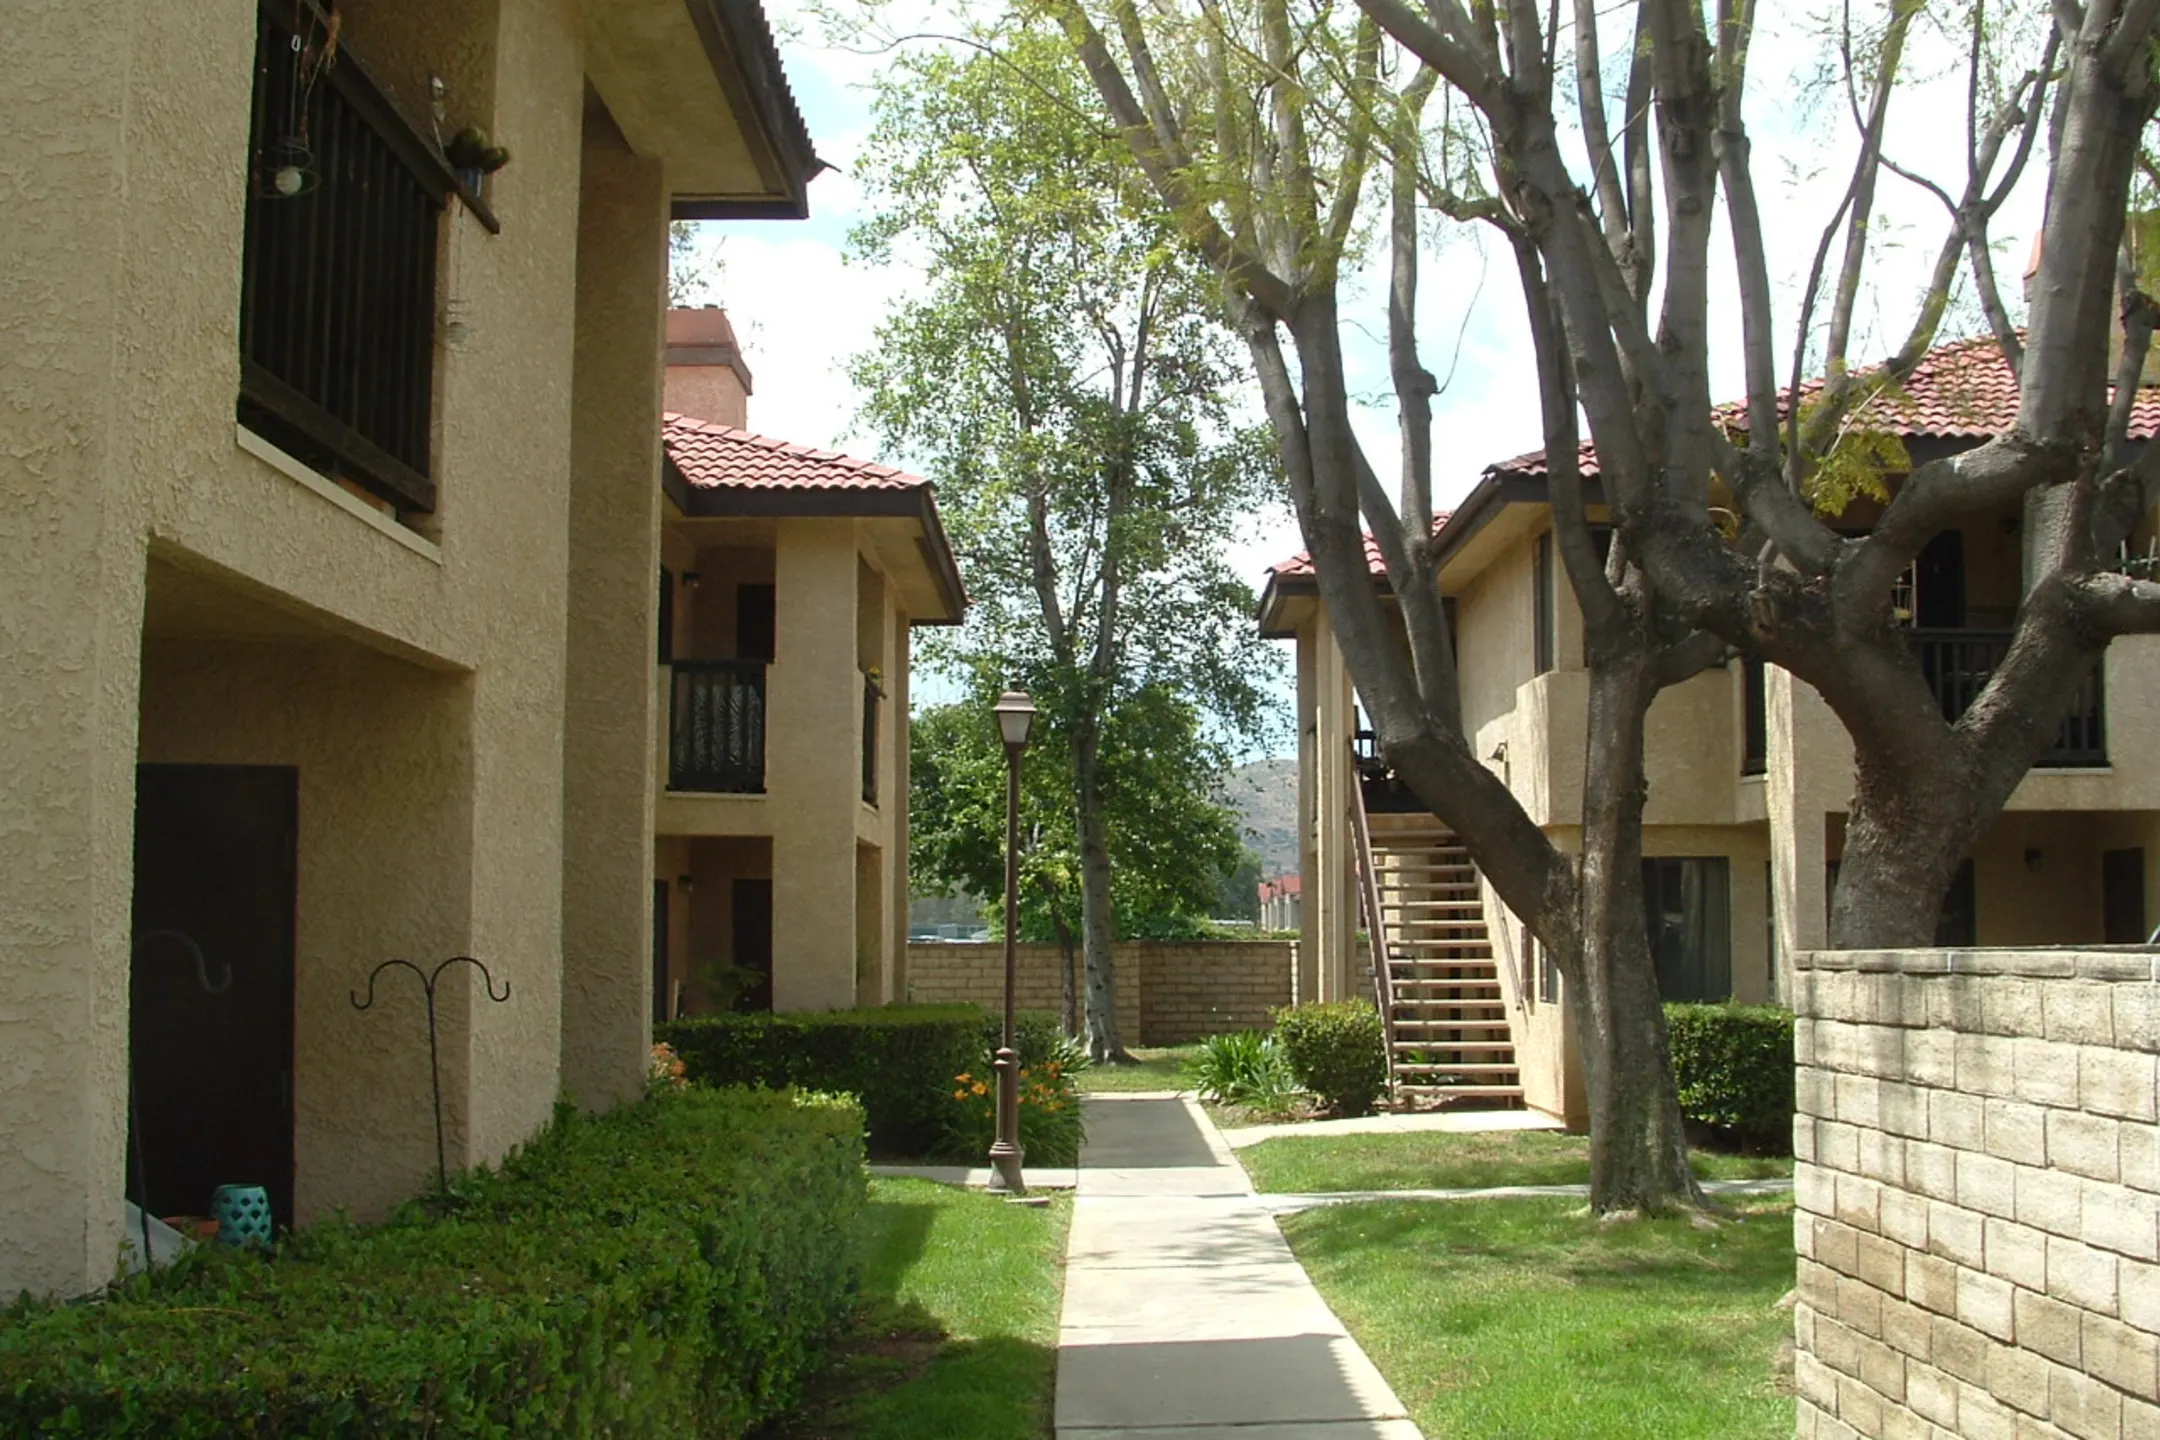 Building - Baywood Apartments - Simi Valley, CA